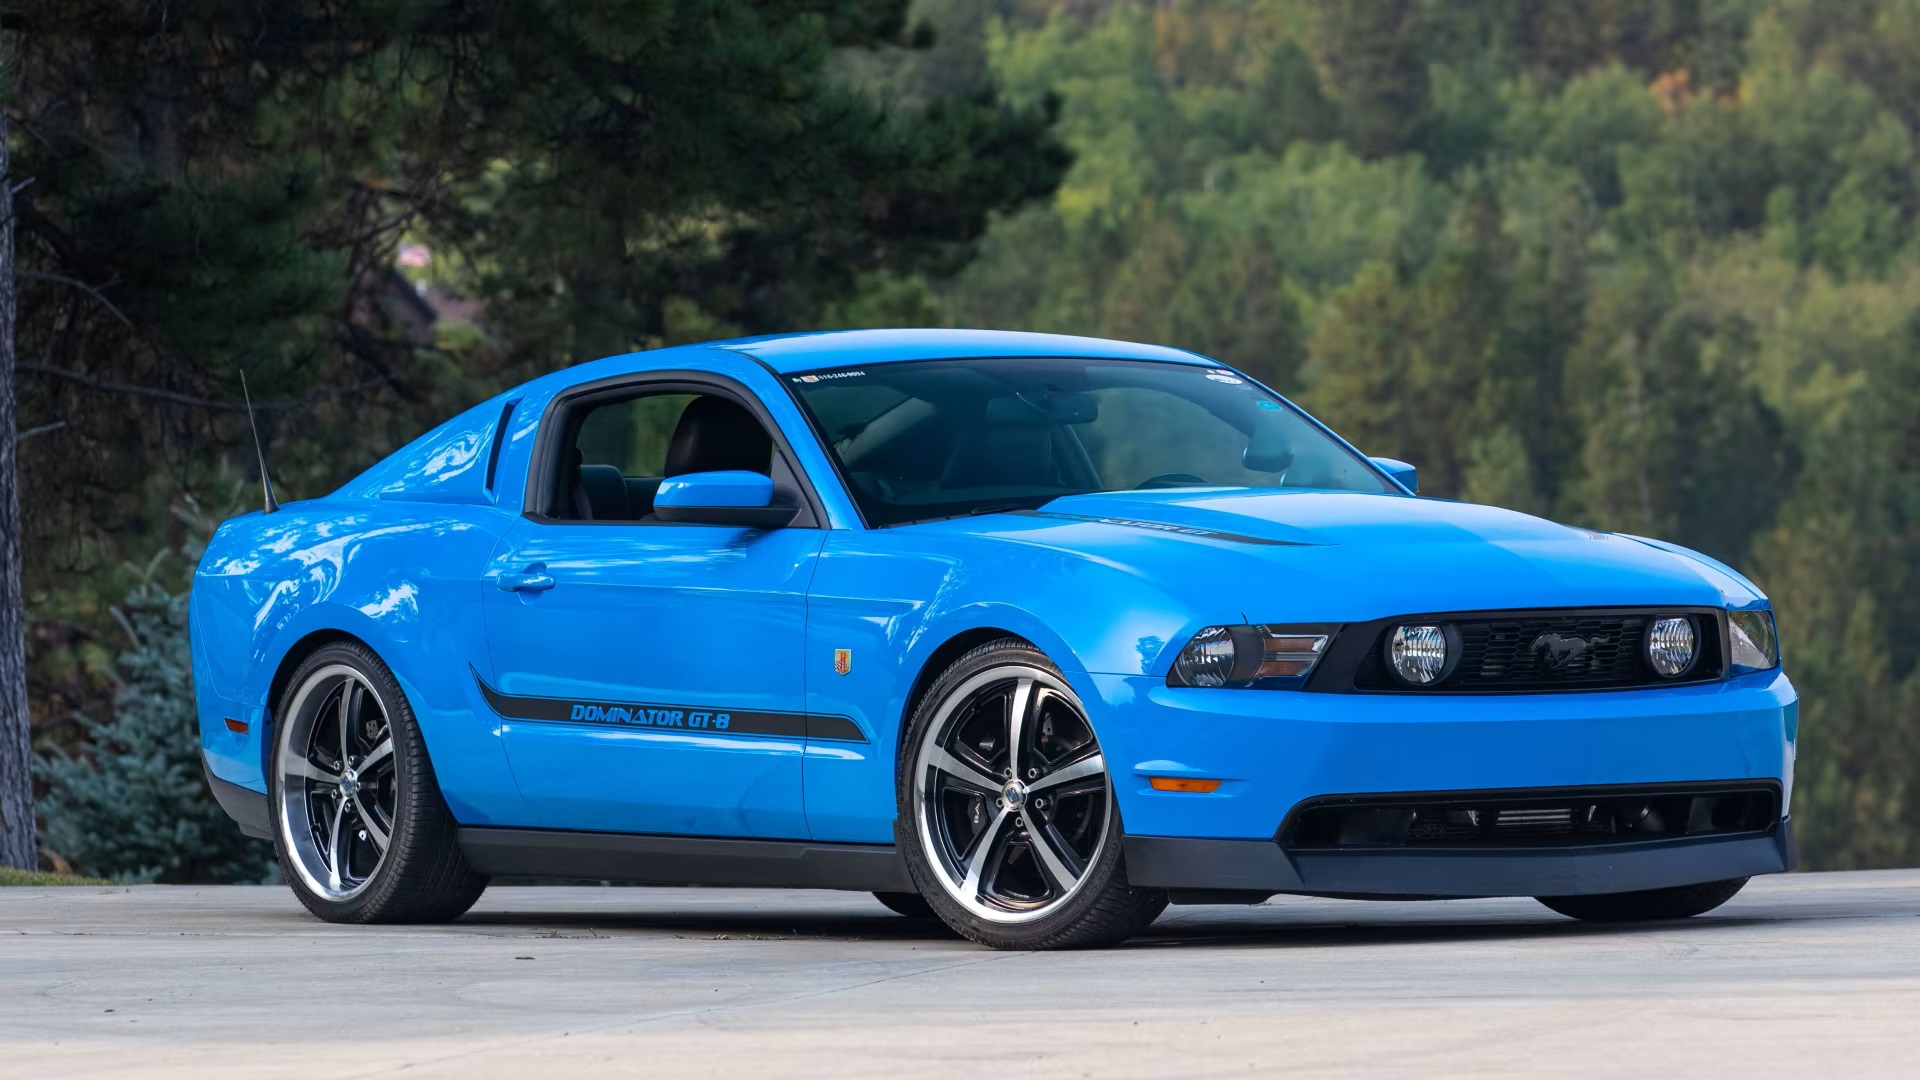 2010 Ford Mustang Dominator GT-8 Prototype